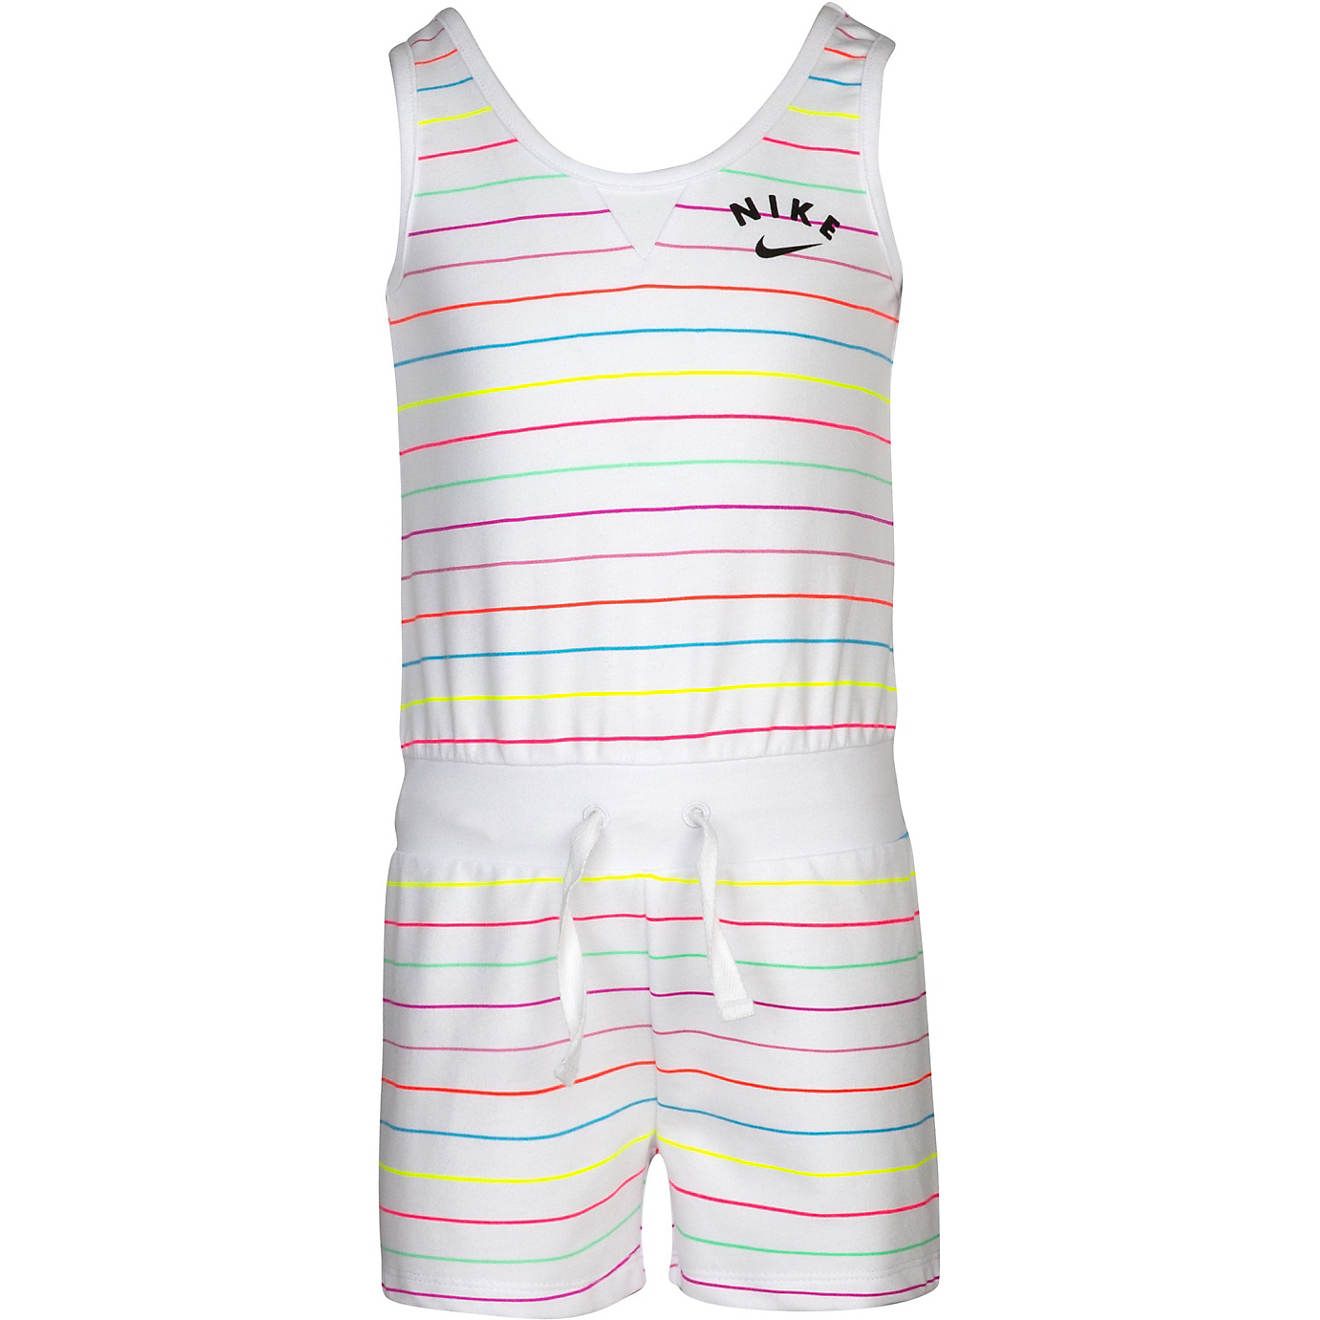 Nike Toddler Girls' Striped Romper | Academy Sports + Outdoor Affiliate